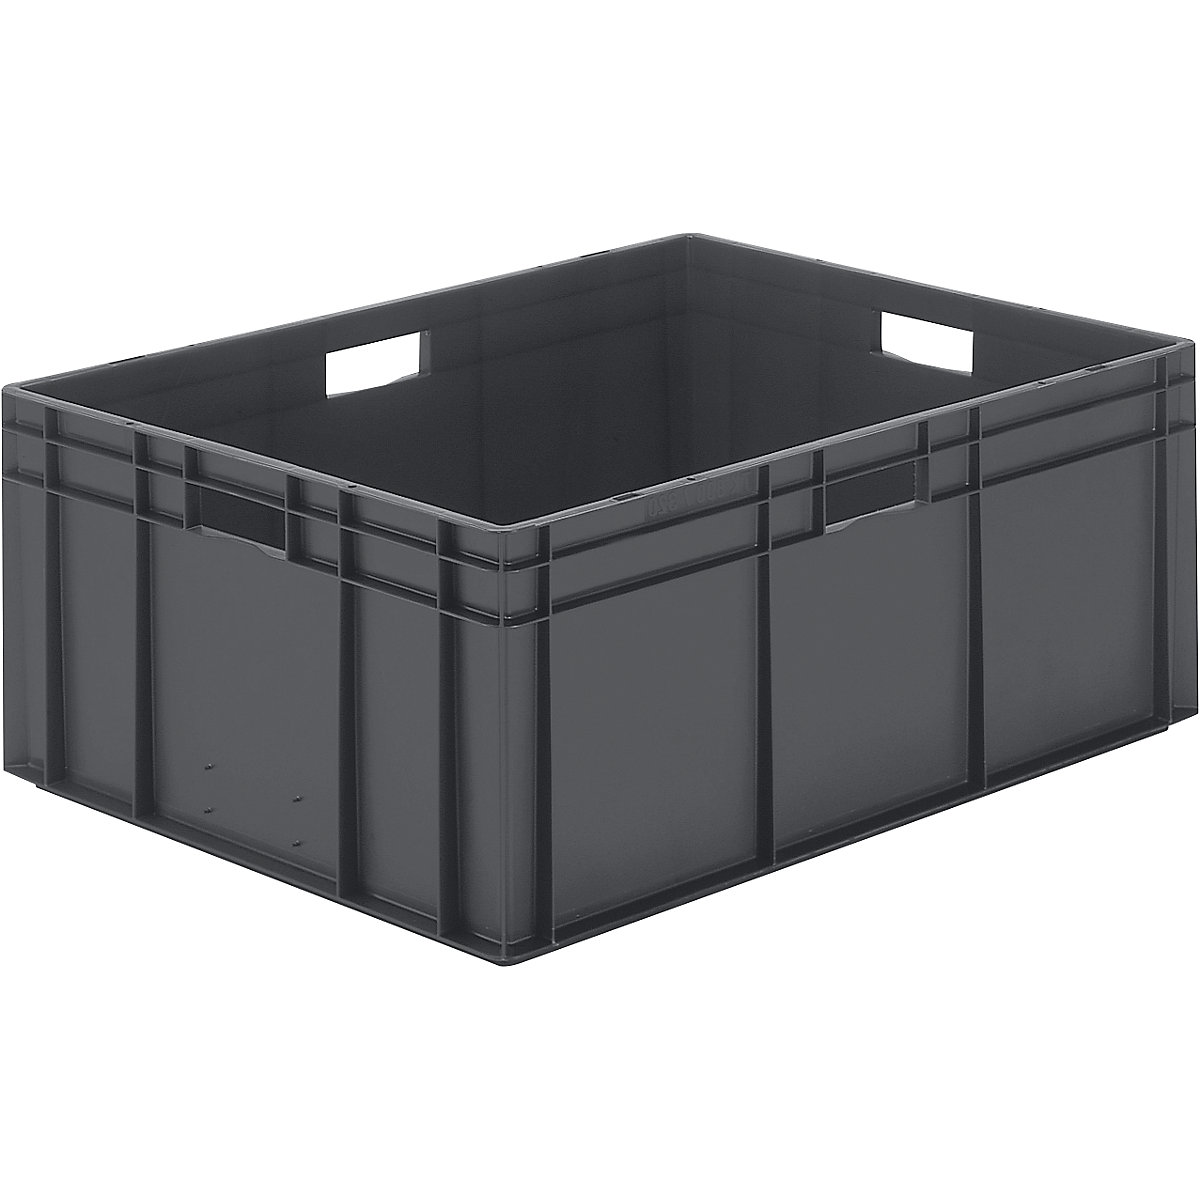 Euro stacking container, closed walls and base, LxWxH 800 x 600 x 320 mm, grey, pack of 2-5